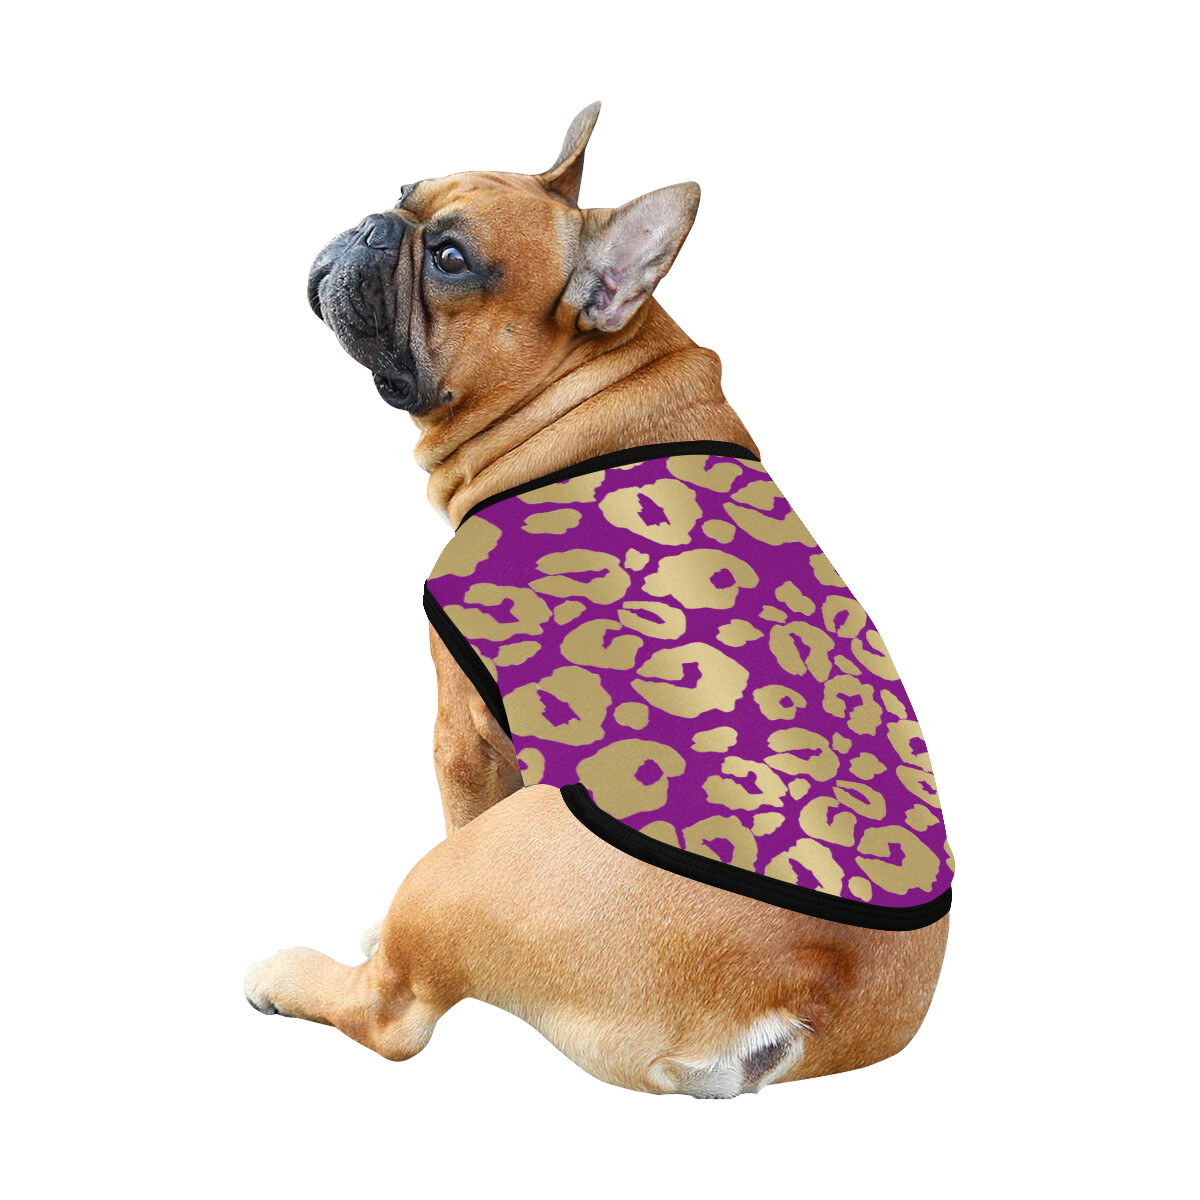 🐕 Leopard print Dog shirt, Dog Tank Top, Dog t-shirt, Dog clothes, Gifts, front back print, 7 sizes XS to 3XL, dog gifts, gold and purple